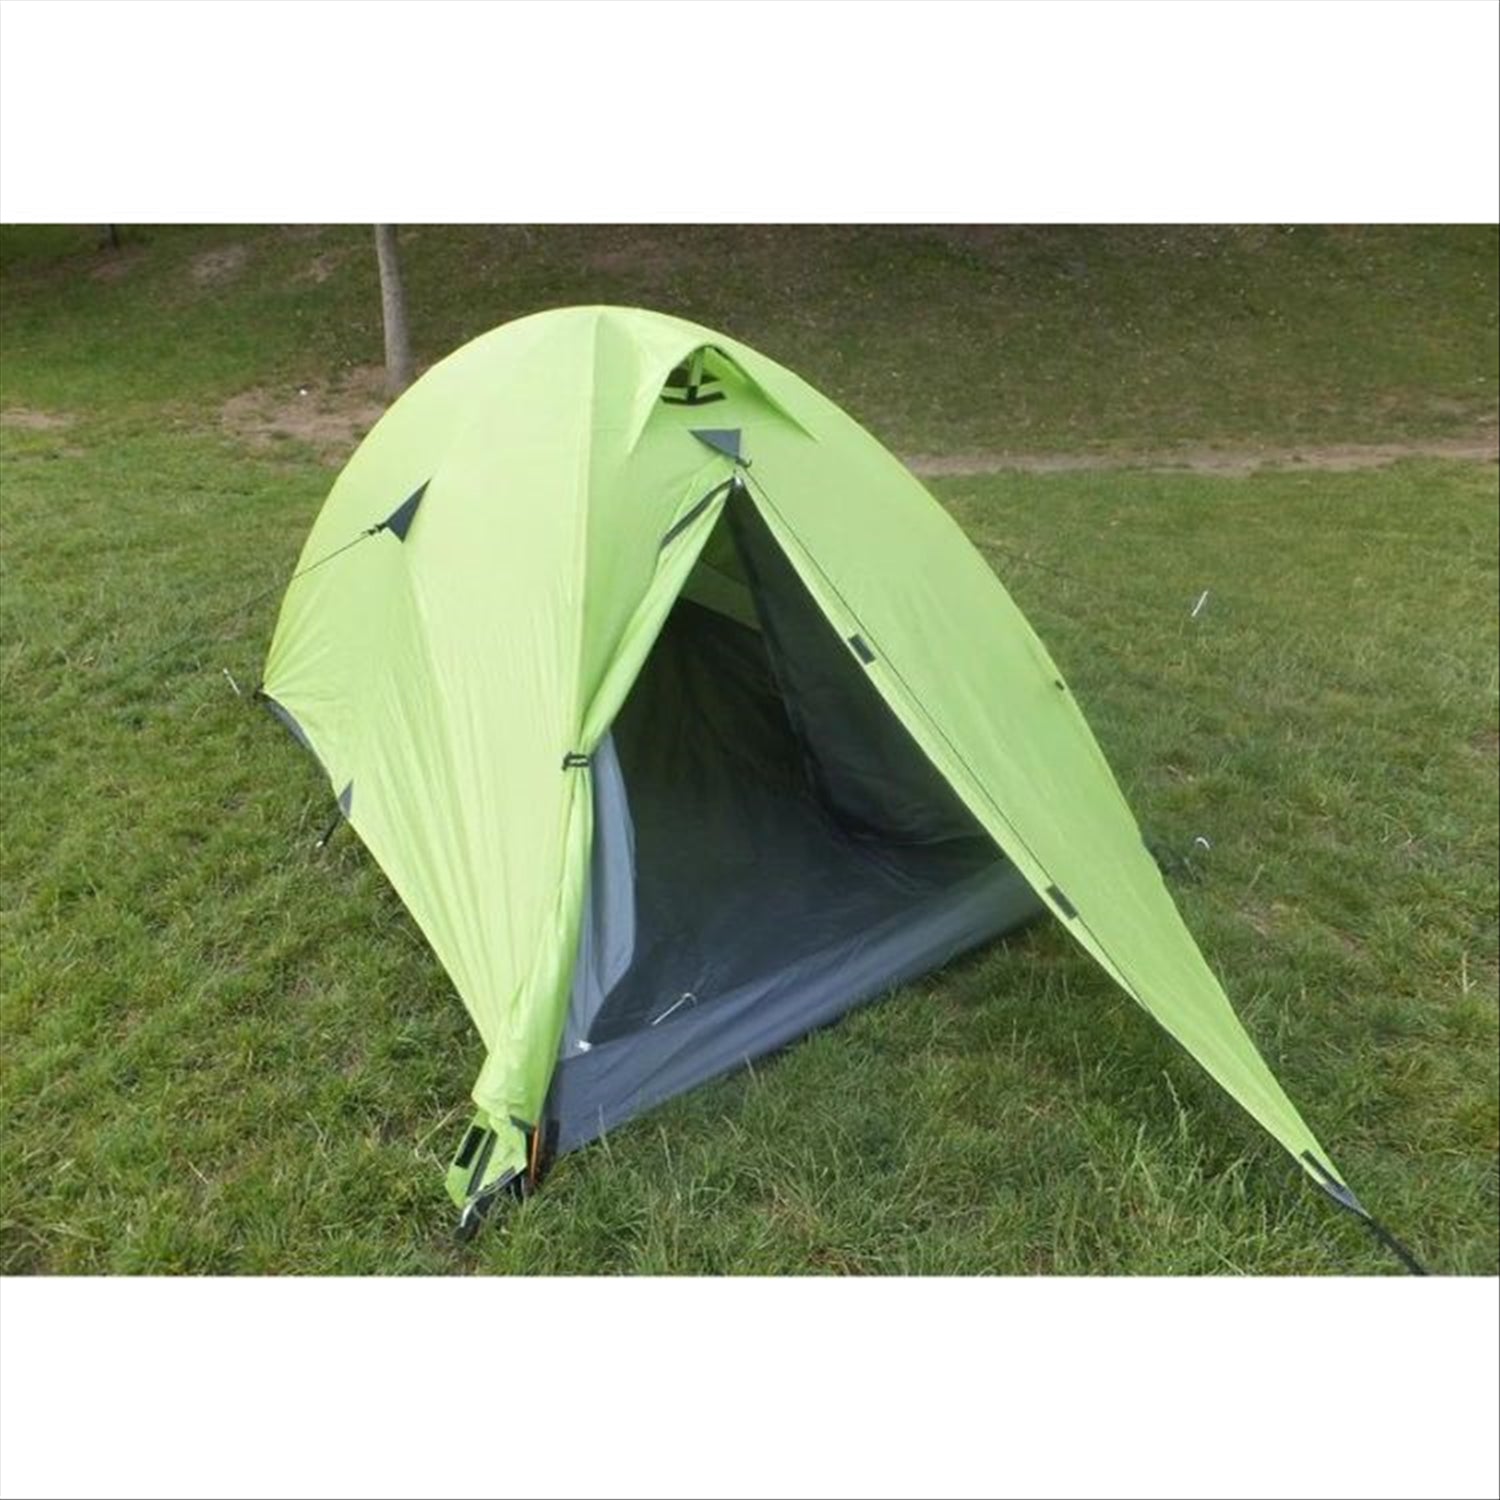 Intents Spirit 2 - 'All Weather Series' Lightweight 2 Person Tent 2.75kg